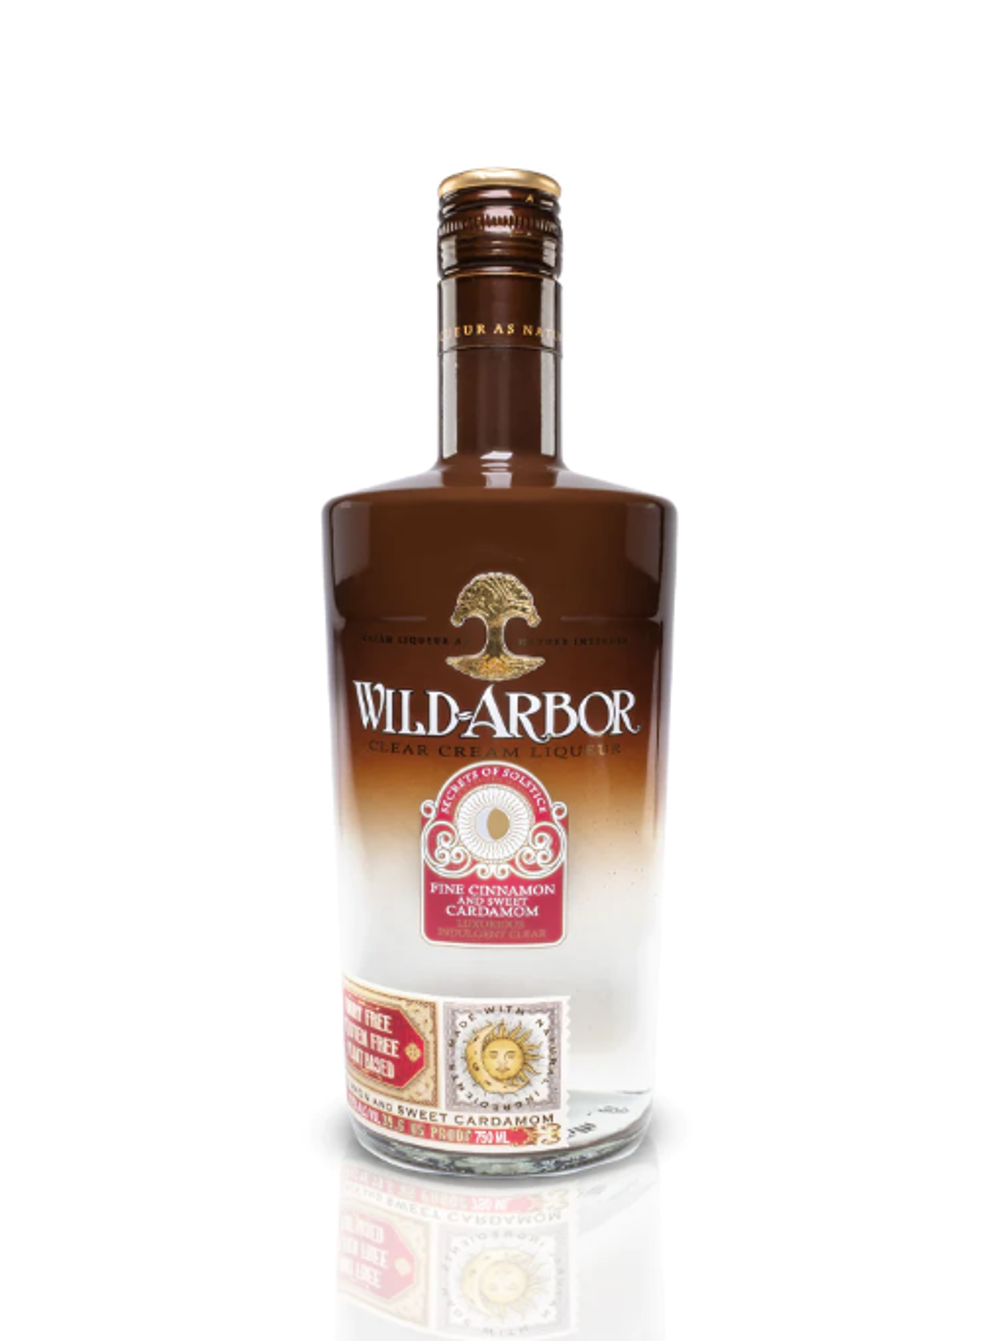 SECRETS OF SOLSTICE  - Wild-Arbor with Cardamom and Cinnamon 19.8% 0.7L, Spirits